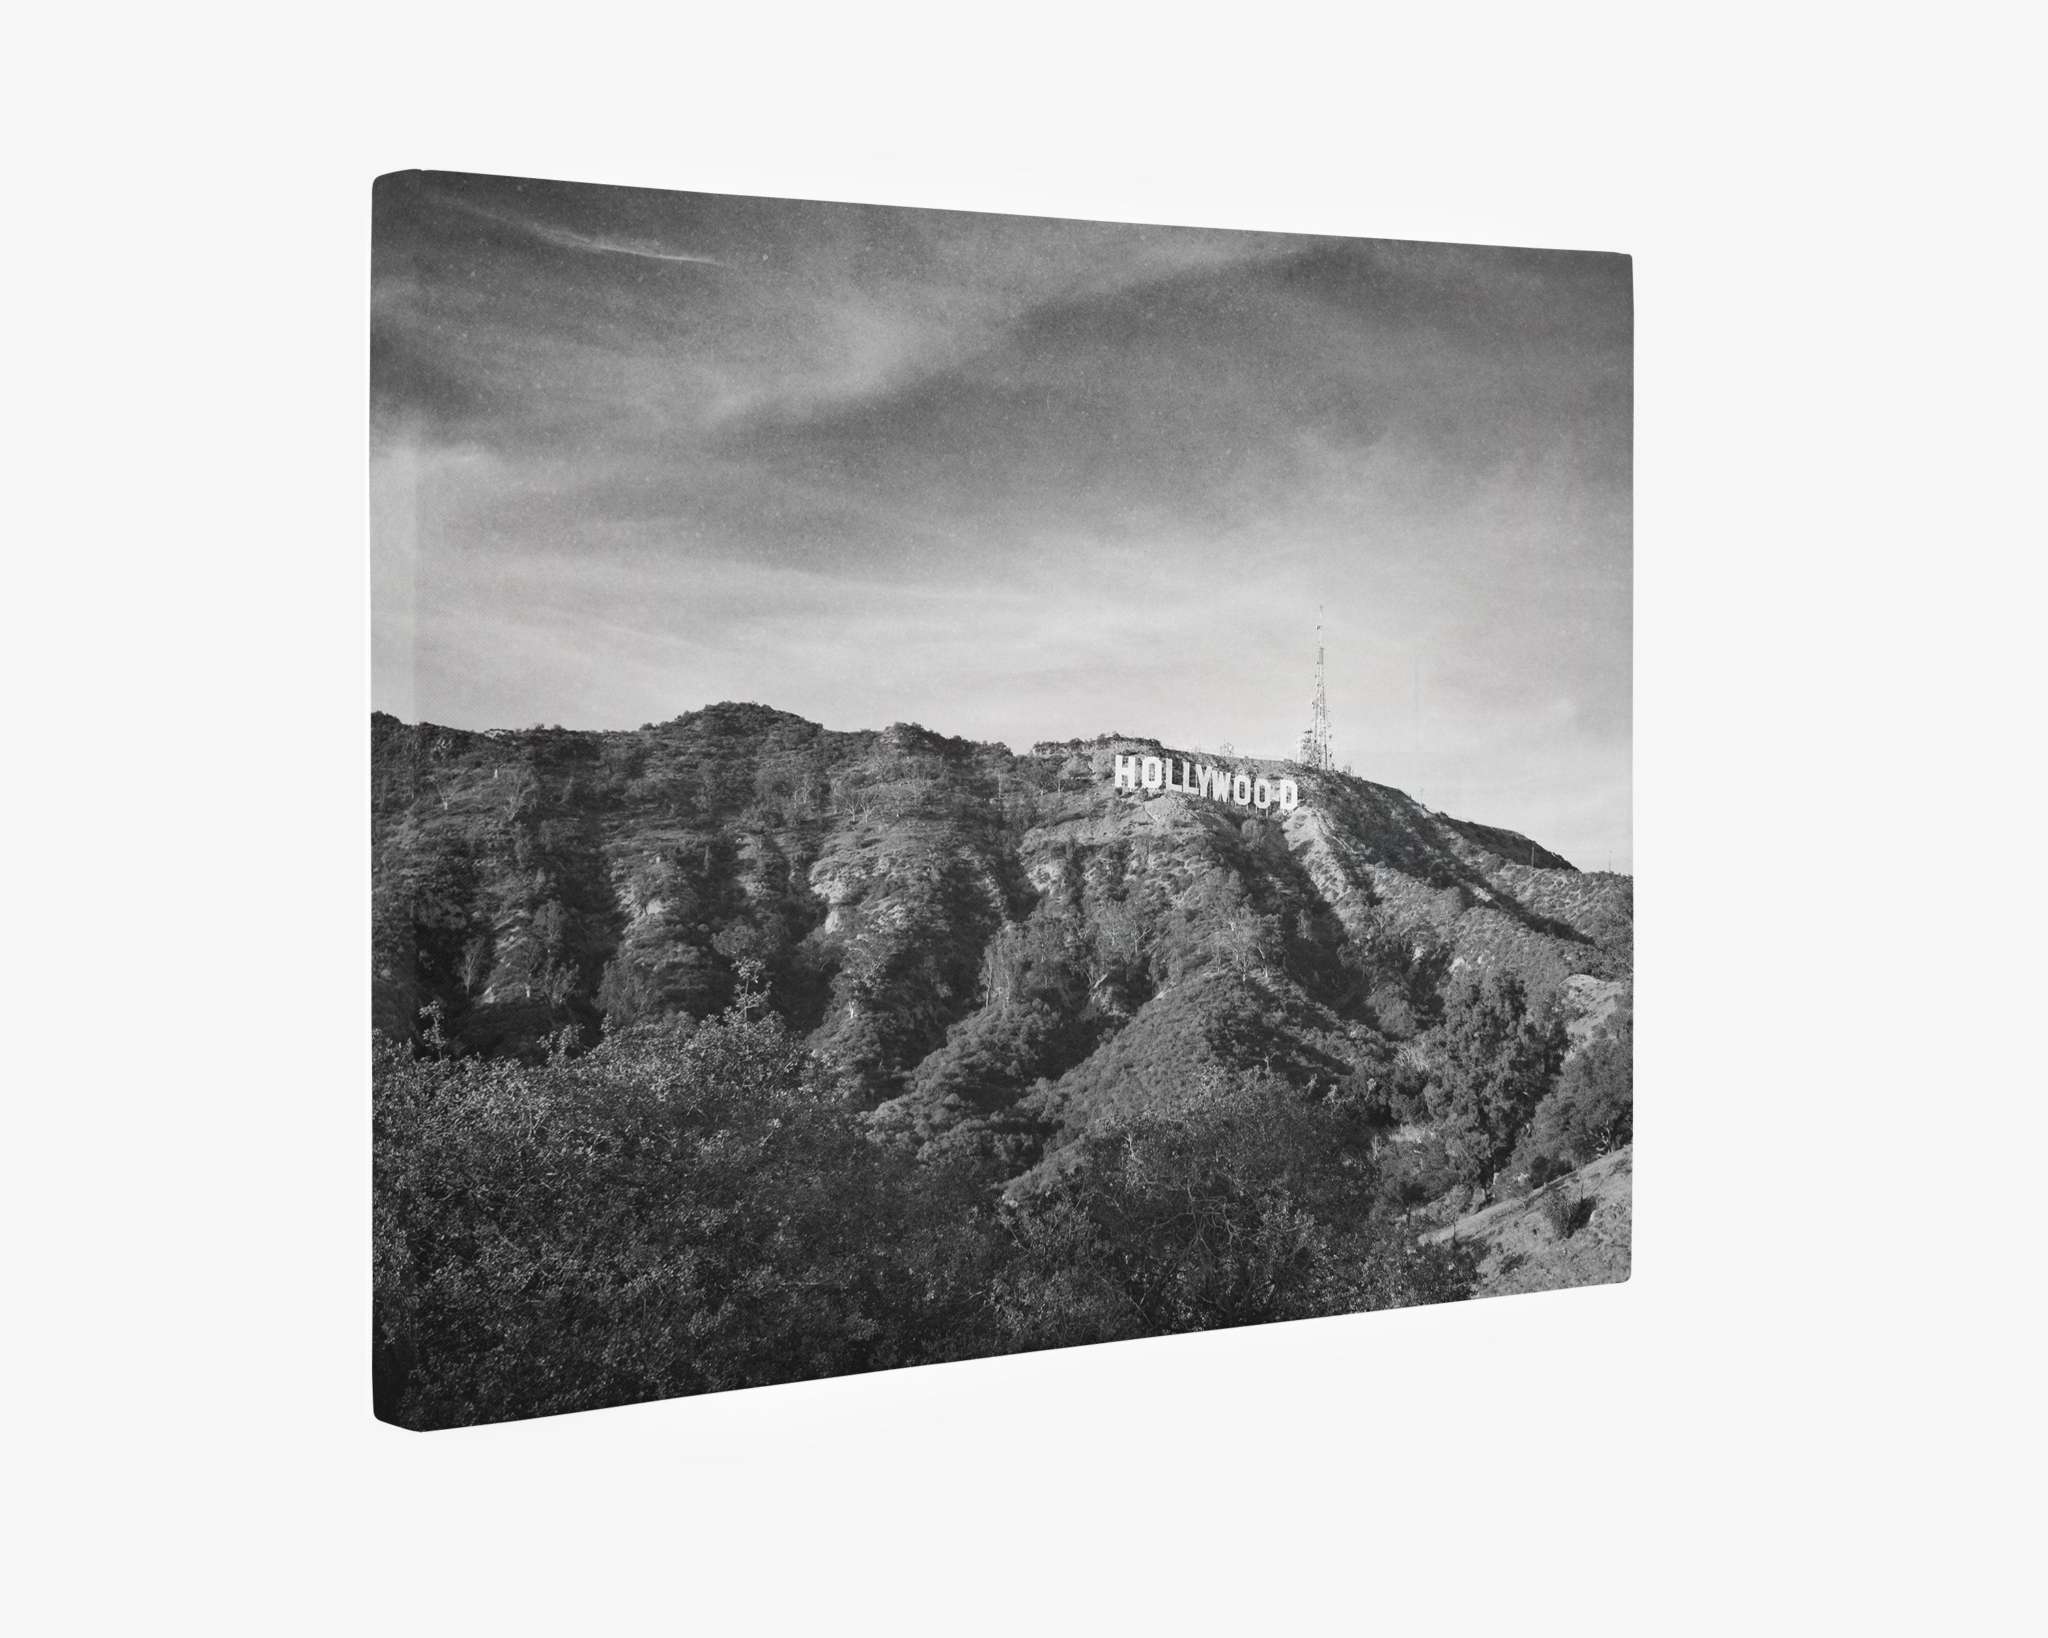 A black-and-white photograph featuring the iconic Hollywood sign perched on a hill in Los Angeles, California. The sign is surrounded by rugged hills and scraggly vegetation, set against a partly cloudy sky, reminiscent of film noir imagery. Perfect for canvas gallery wrap prints like the Hollywood Sign Black and White Vintage Wall Art, &#39;Old Hollywood&#39; by Offley Green.